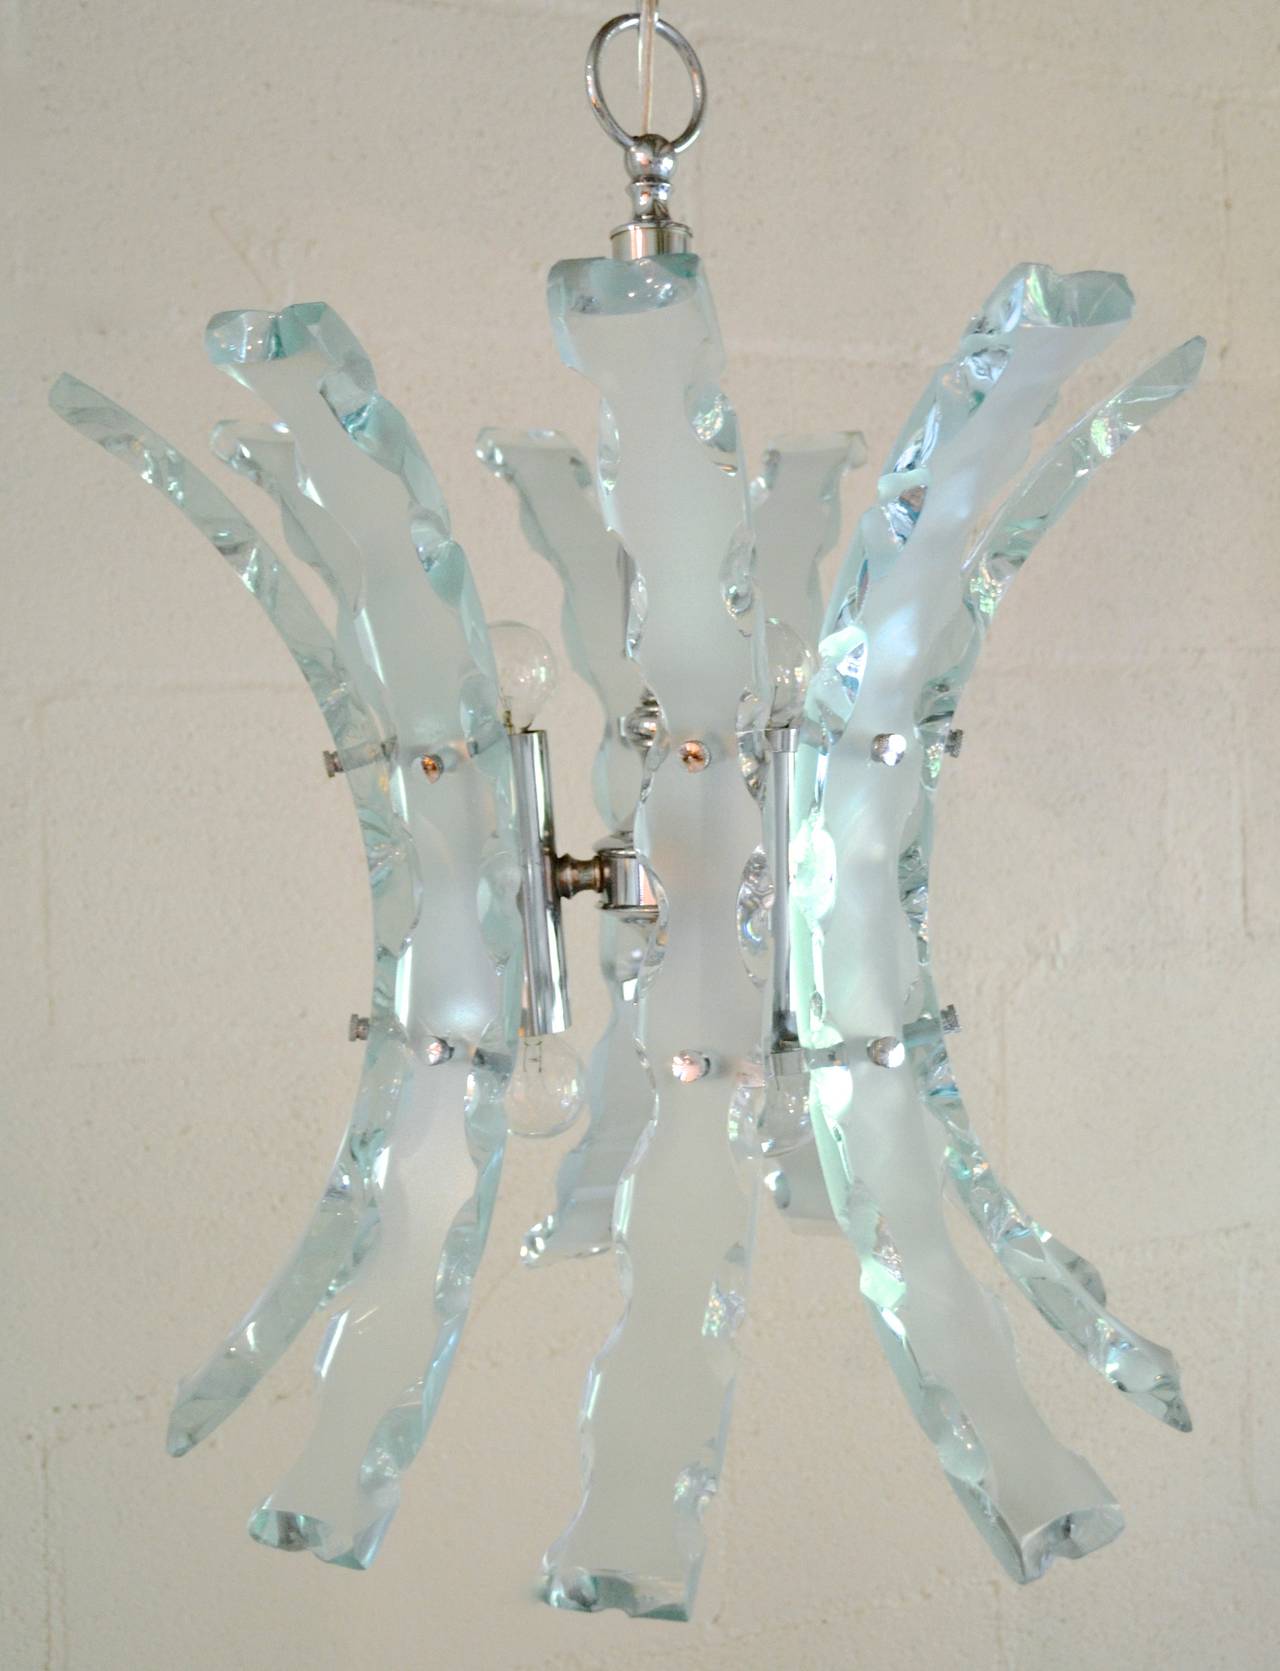 Italian Mid-Century Modern chrome and glass six-light chandelier, circa 1960. The glass is frosted on the surface but clear at the chiseled edges rendering great sparkle to a room. Attributed to Fontana Arte.

Main fixture is 21